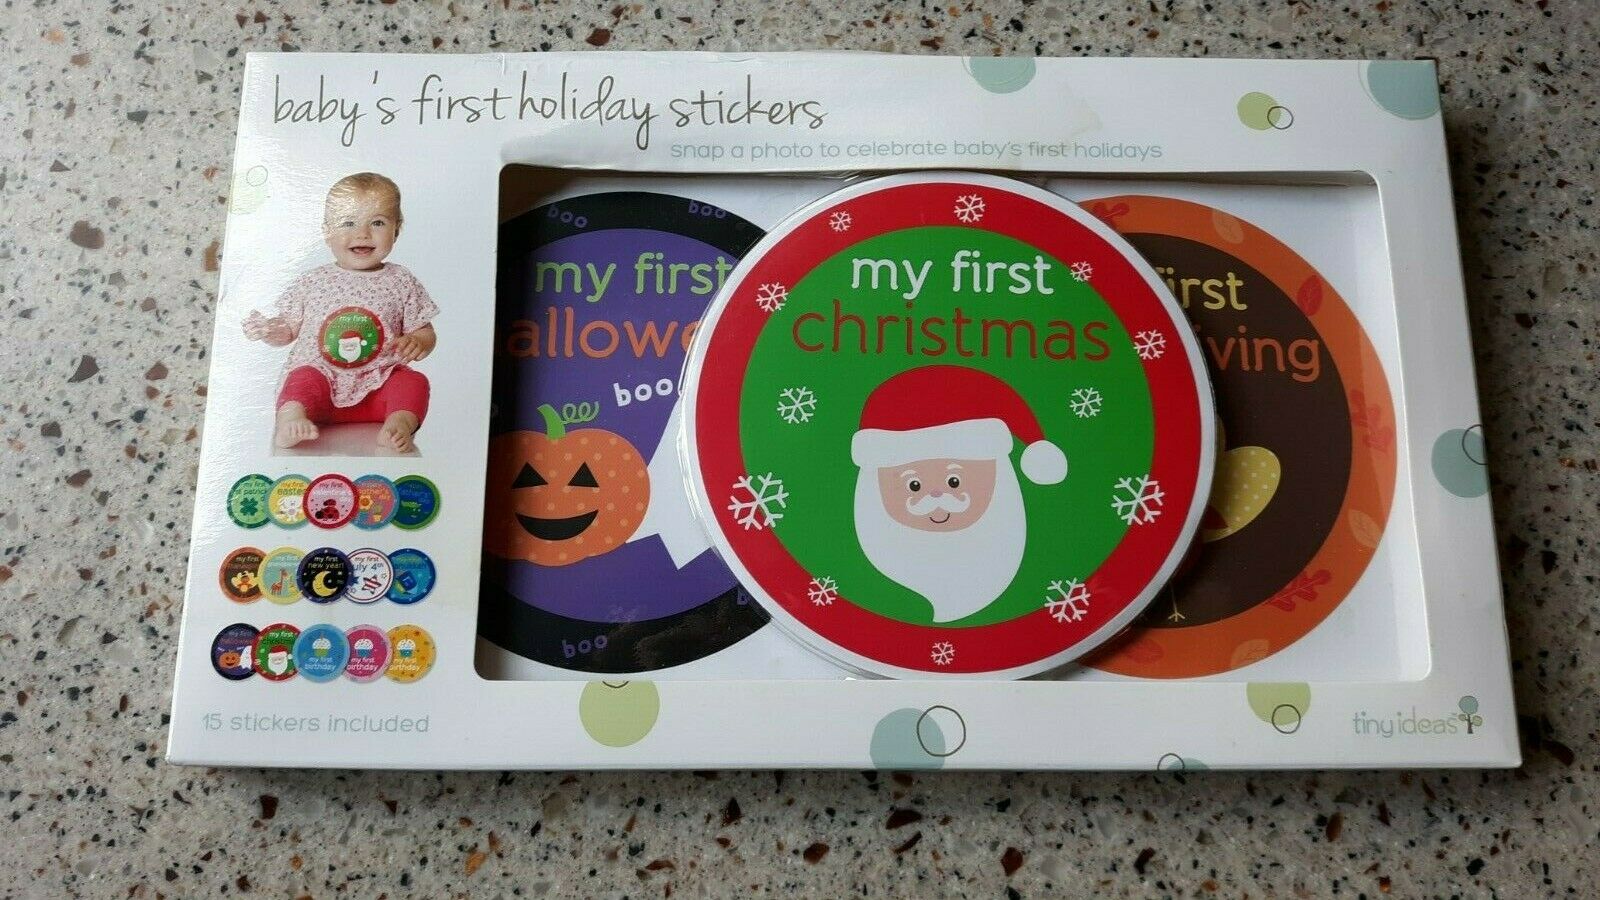 Tiny Ideas  ~ Baby's First Holiday Stickers  ~ 15 Stickers  New